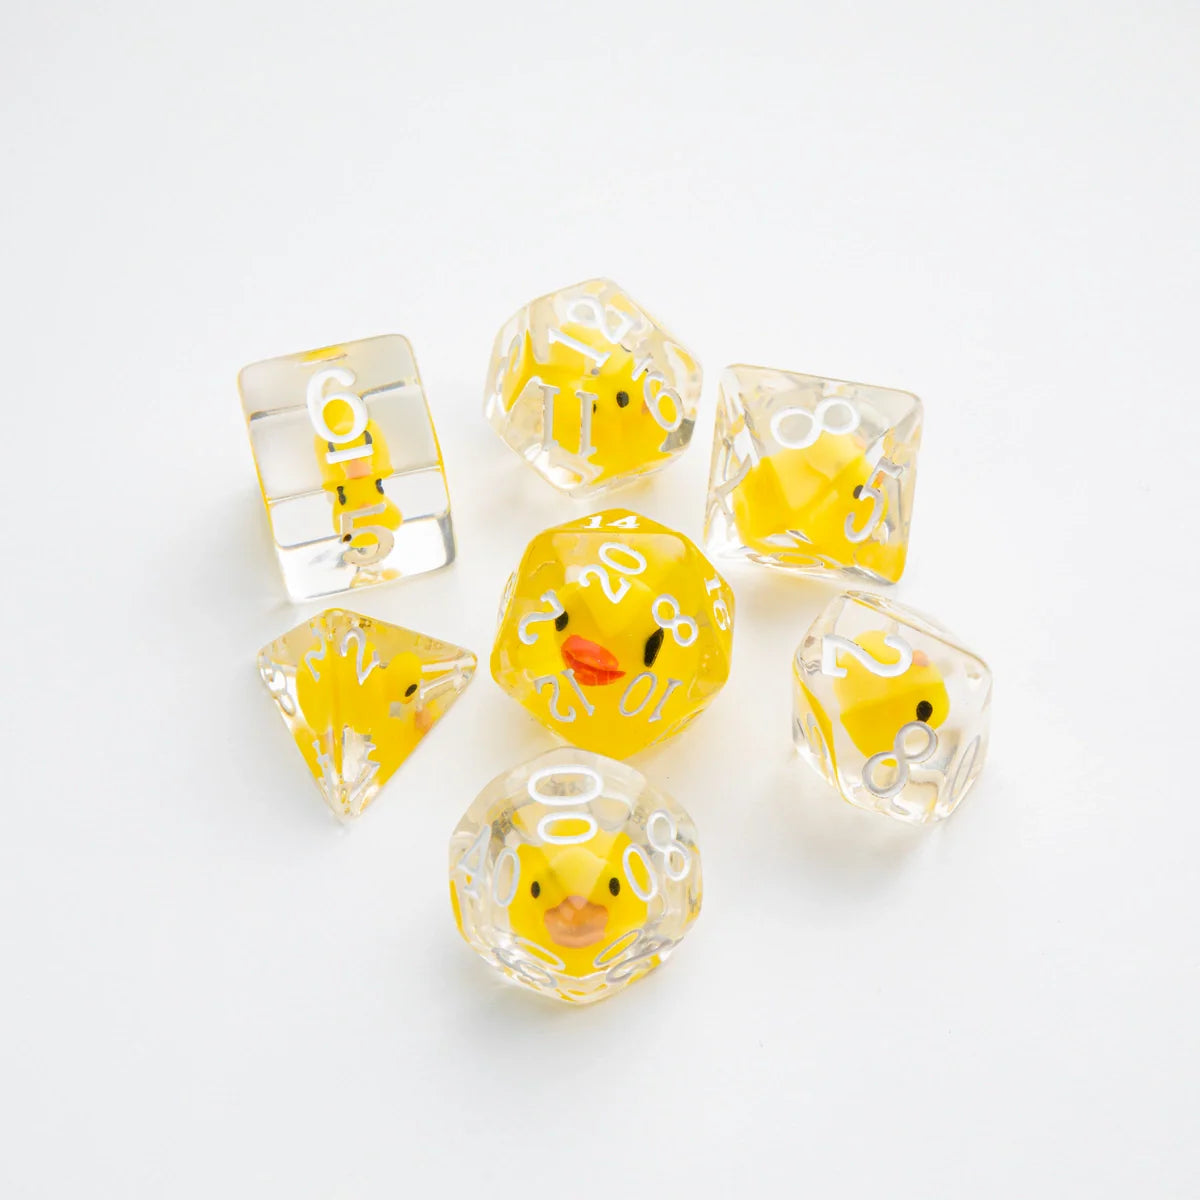 Gamegenic RPG Dice Set - Embraced Series - Rubber Duck